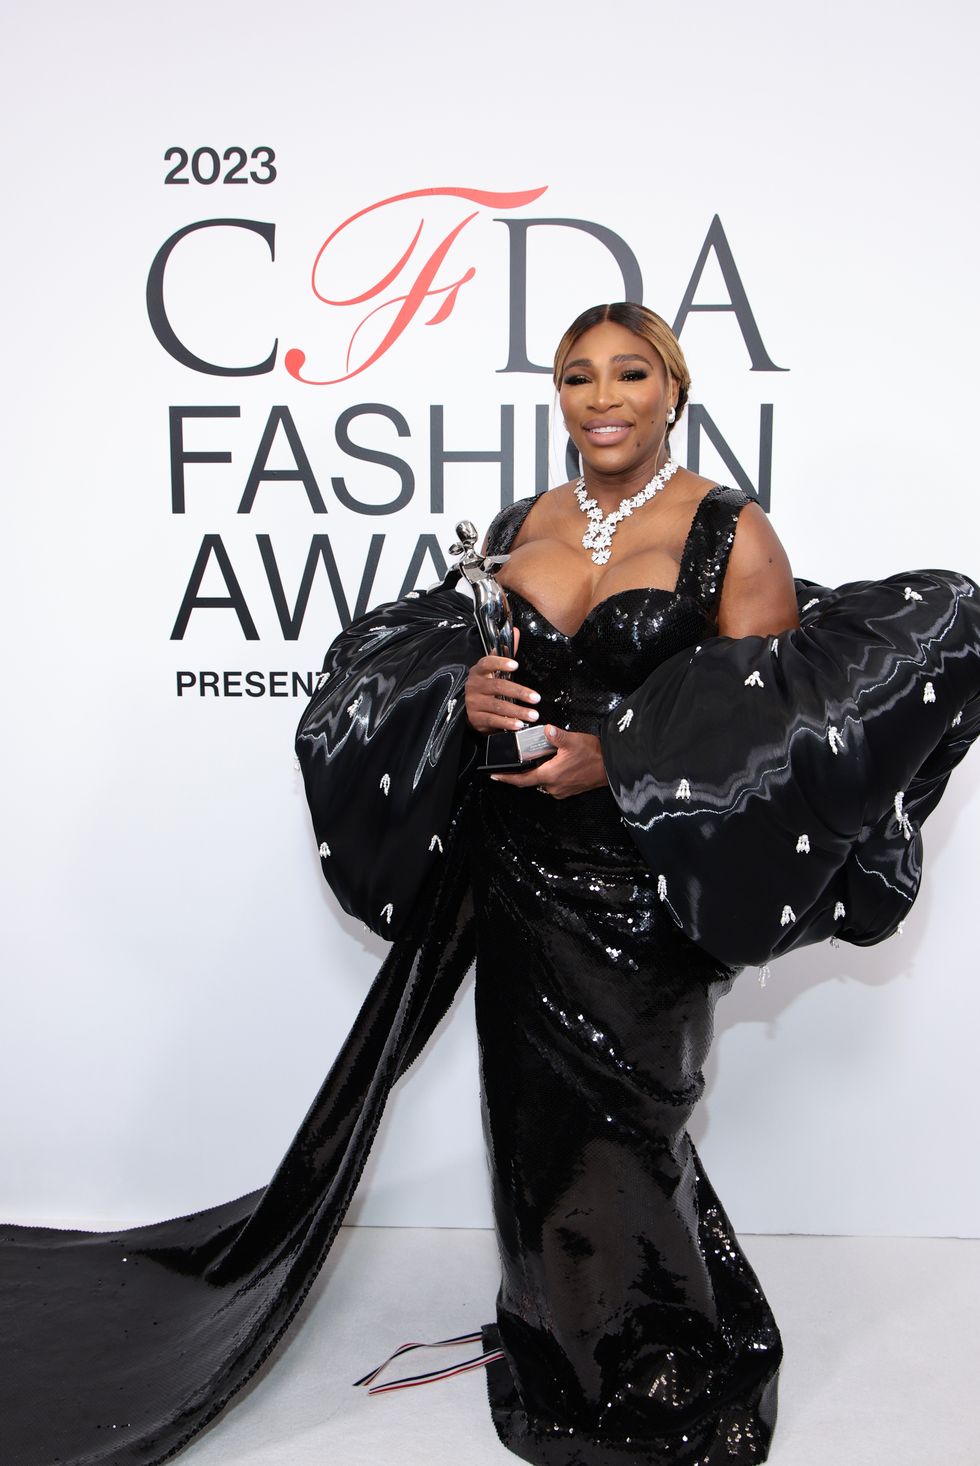 new york, new york november 06 serena williams, fashion icon award winner, attends the 2023 cfda fashion awards at american museum of natural history on november 06, 2023 in new york city photo by dimitrios kambourisgetty images